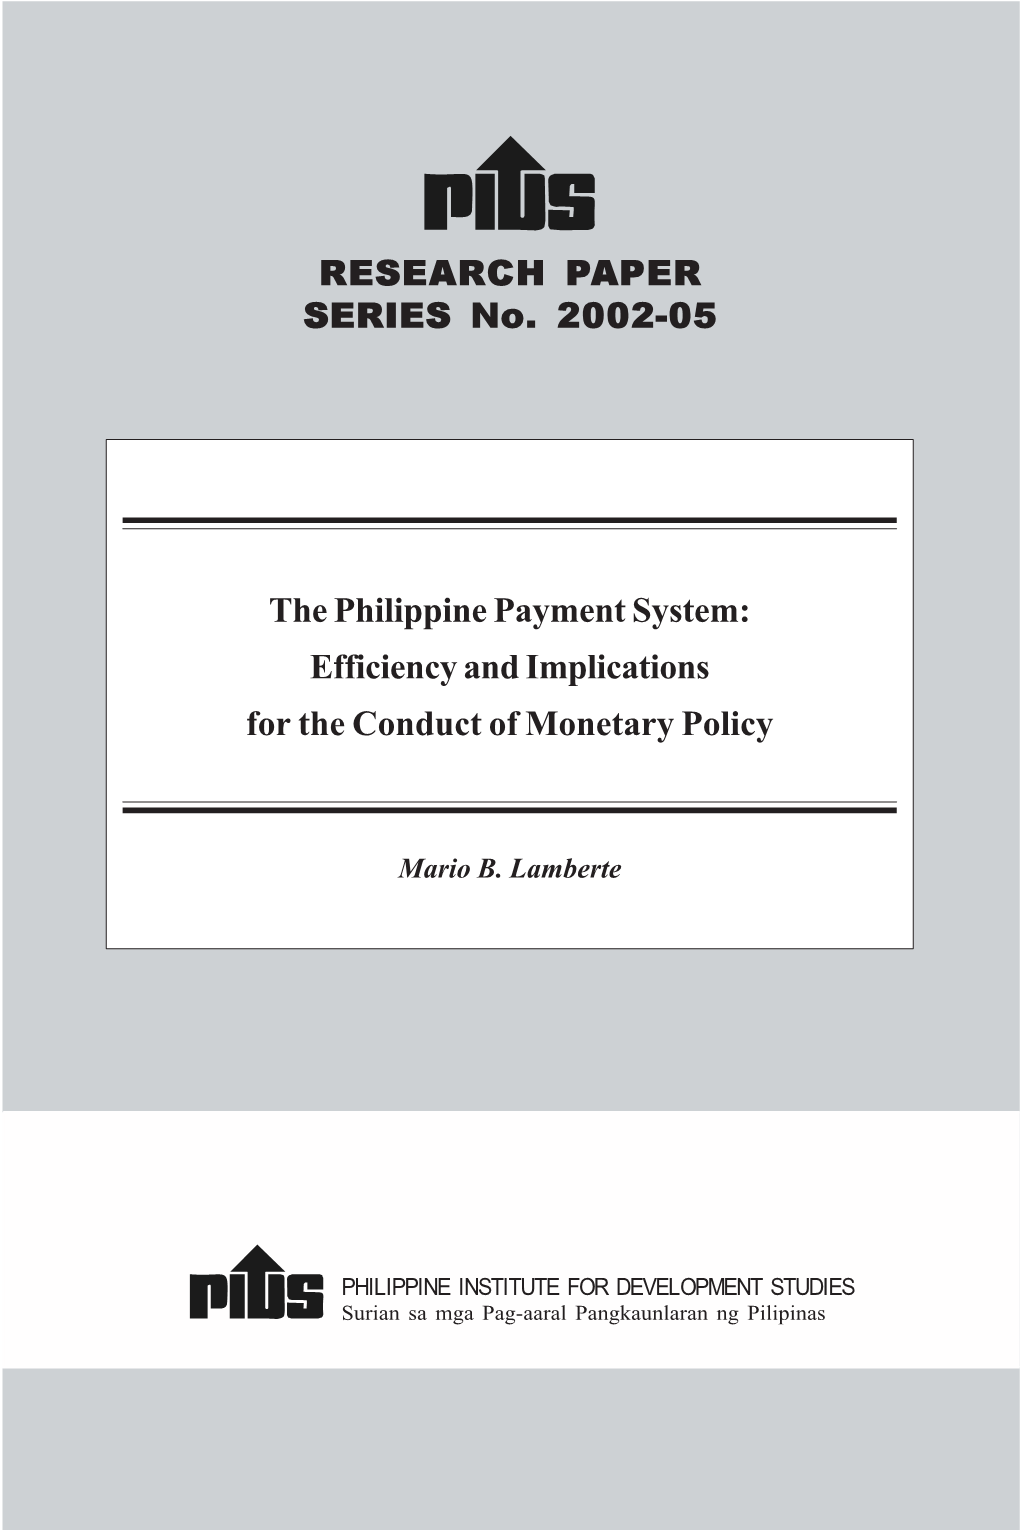 The Philippine Payment System: Efficiency and Implications for the Conduct of Monetary Policy